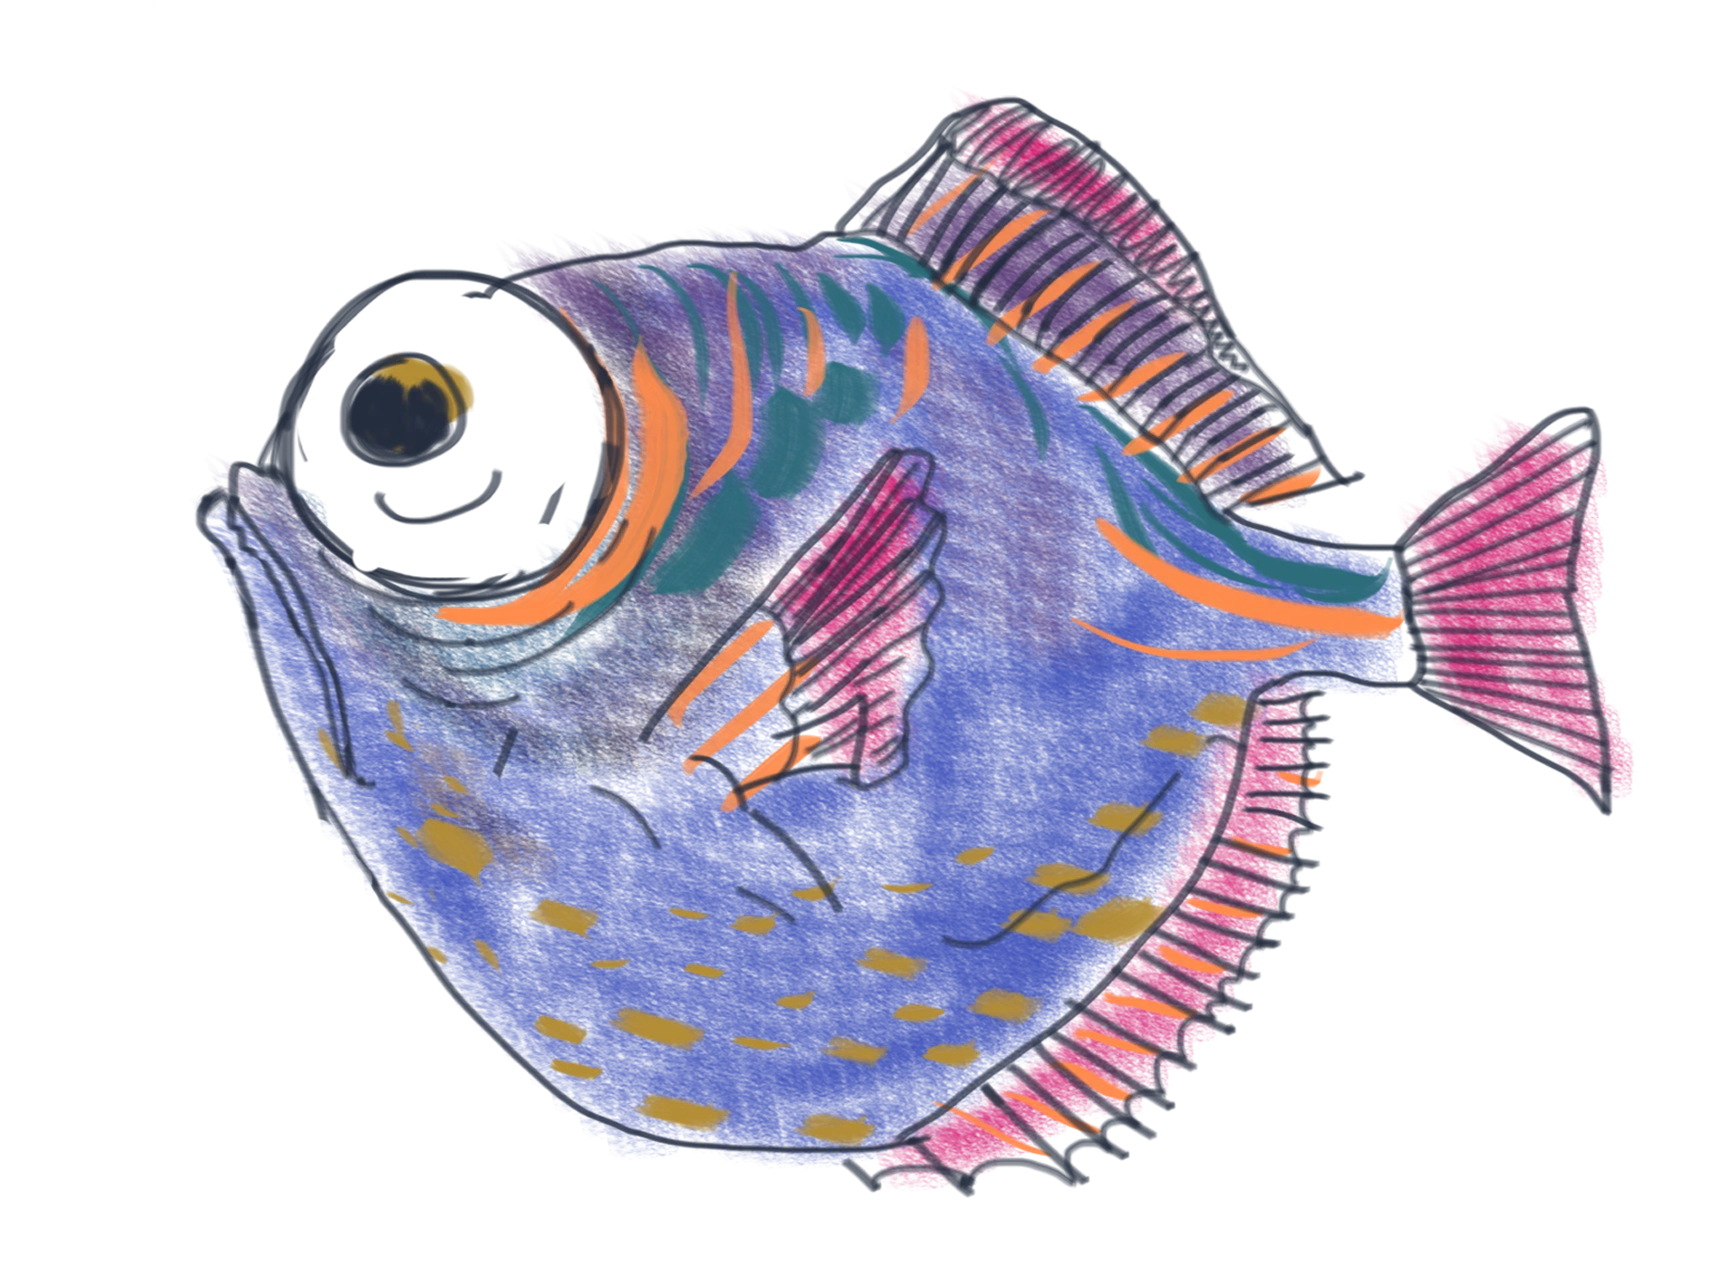 103-poisson-chasseur-16737172766017.png